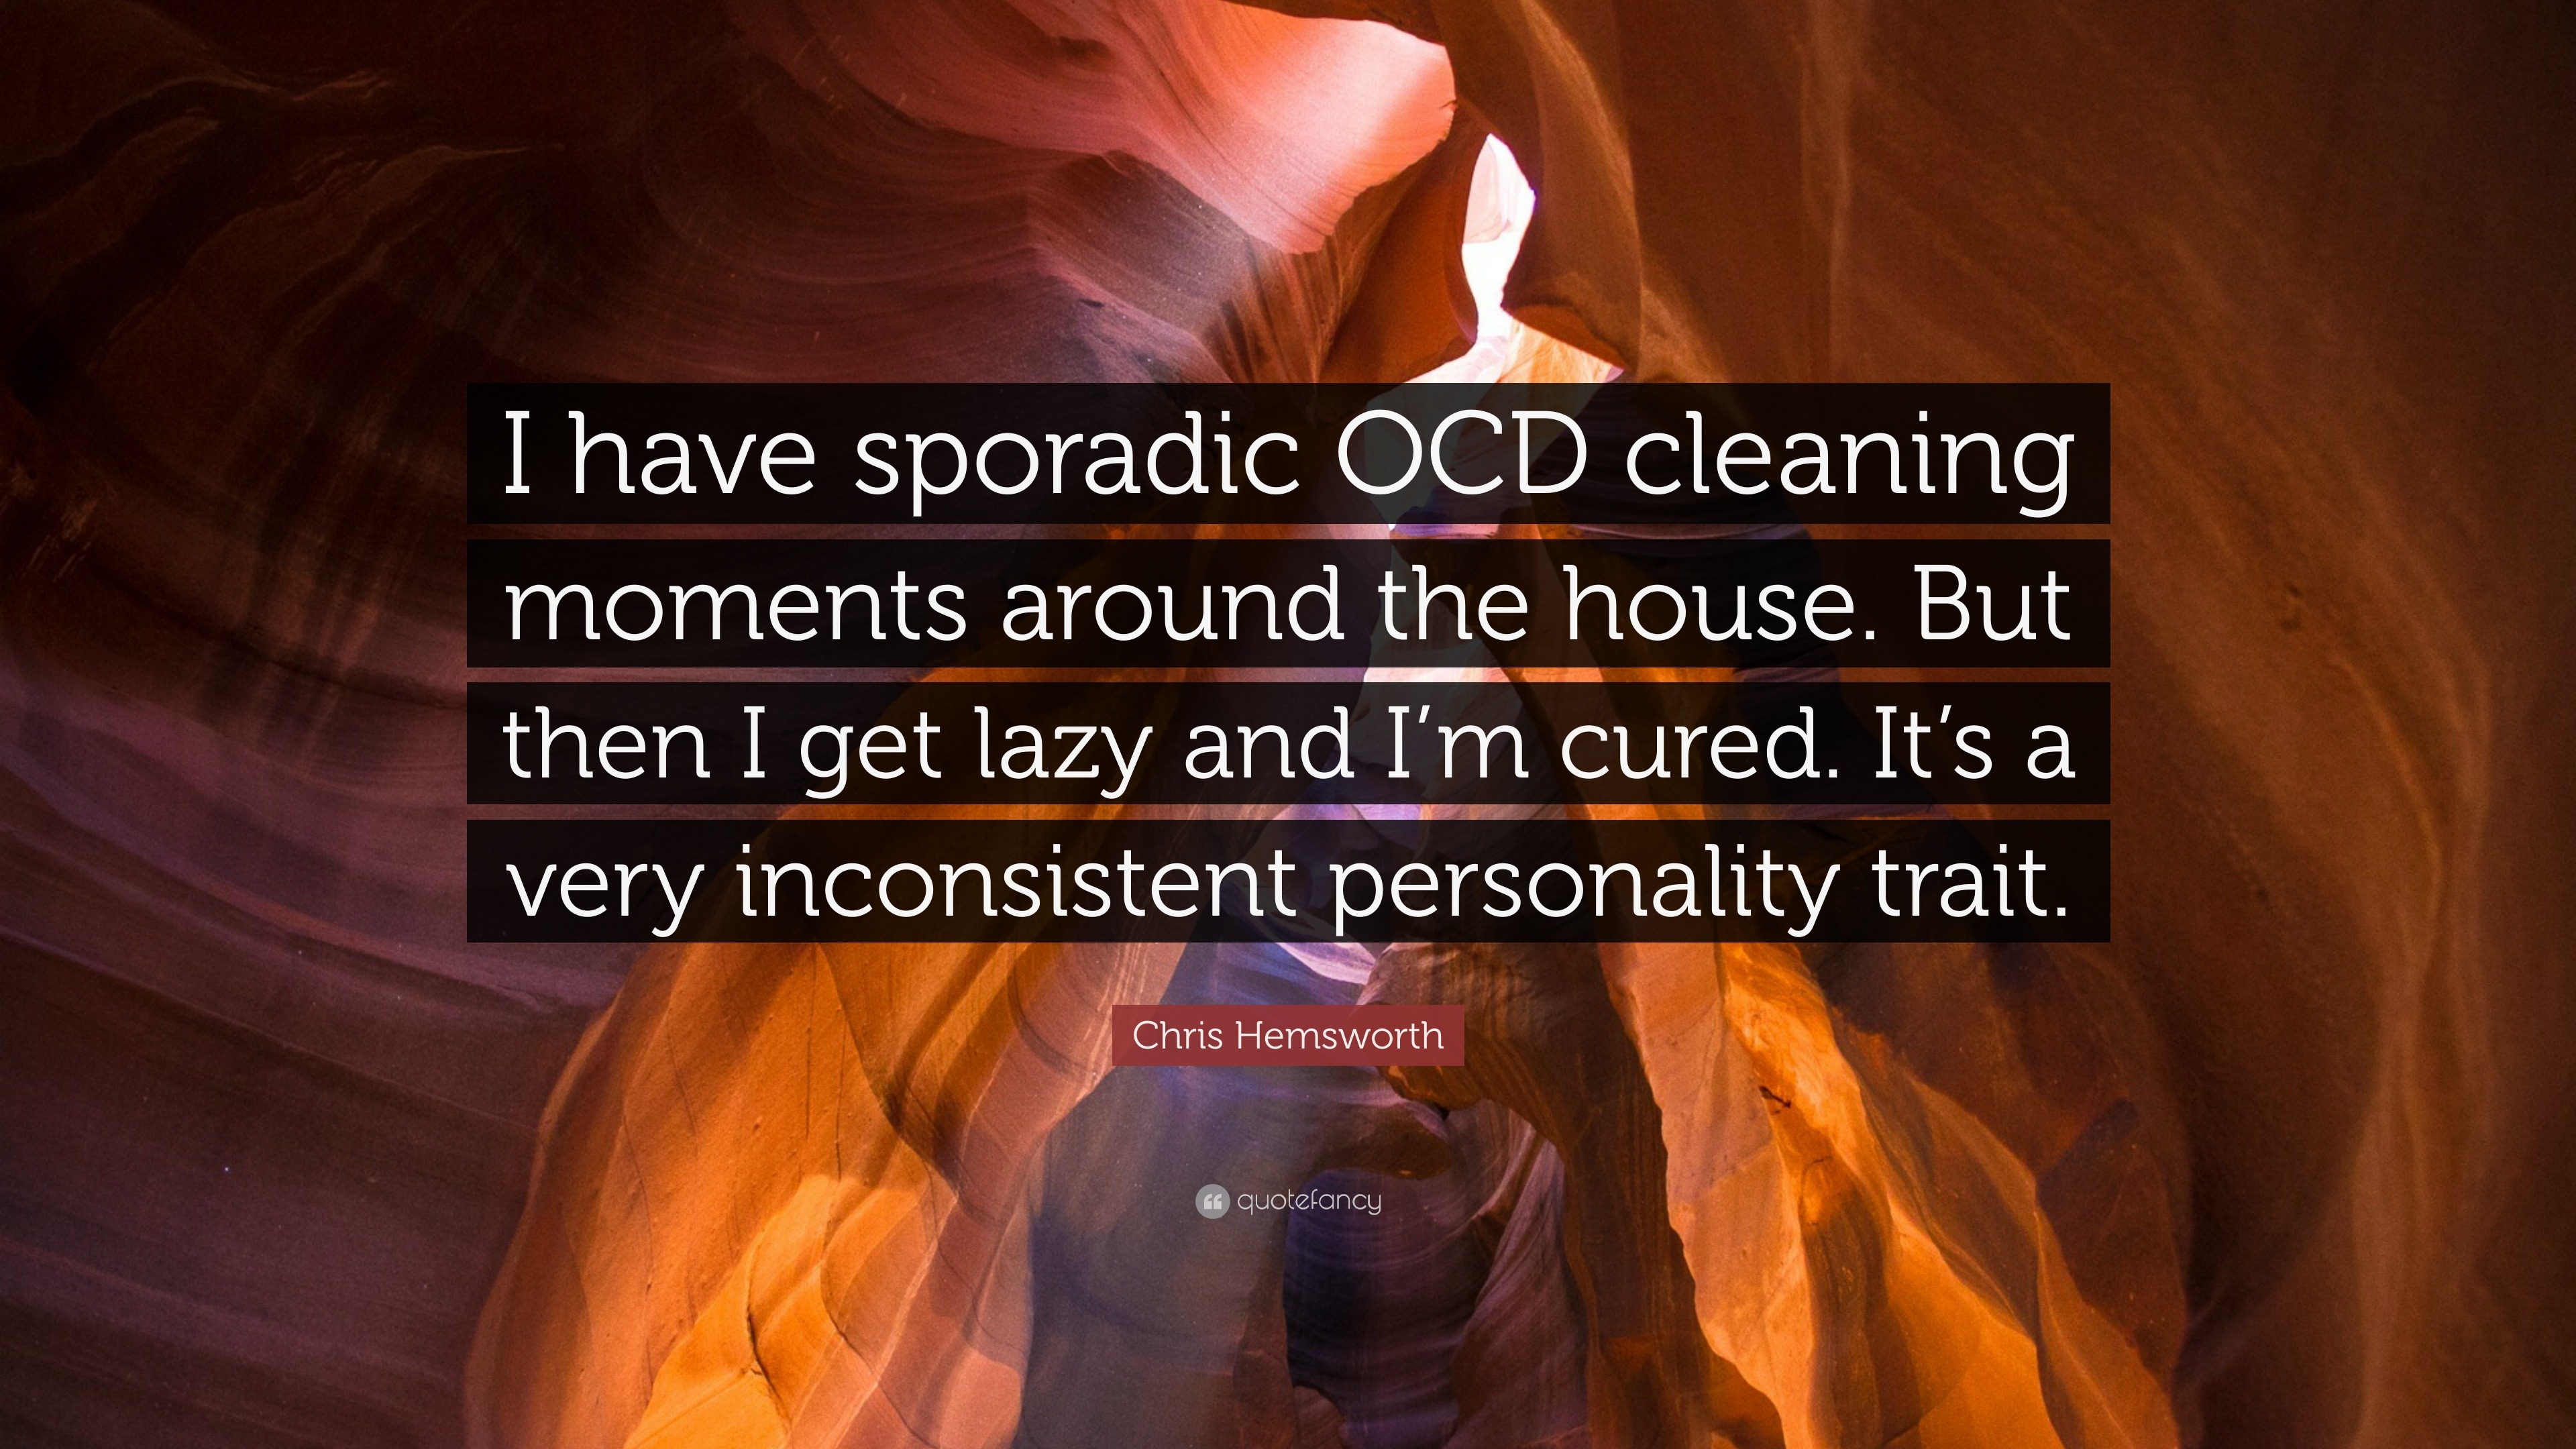 Chris Hemsworth Quote: “I have sporadic OCD cleaning moments around the  house. But then I get lazy and I'm cured. It's a very inconsistent perso...”